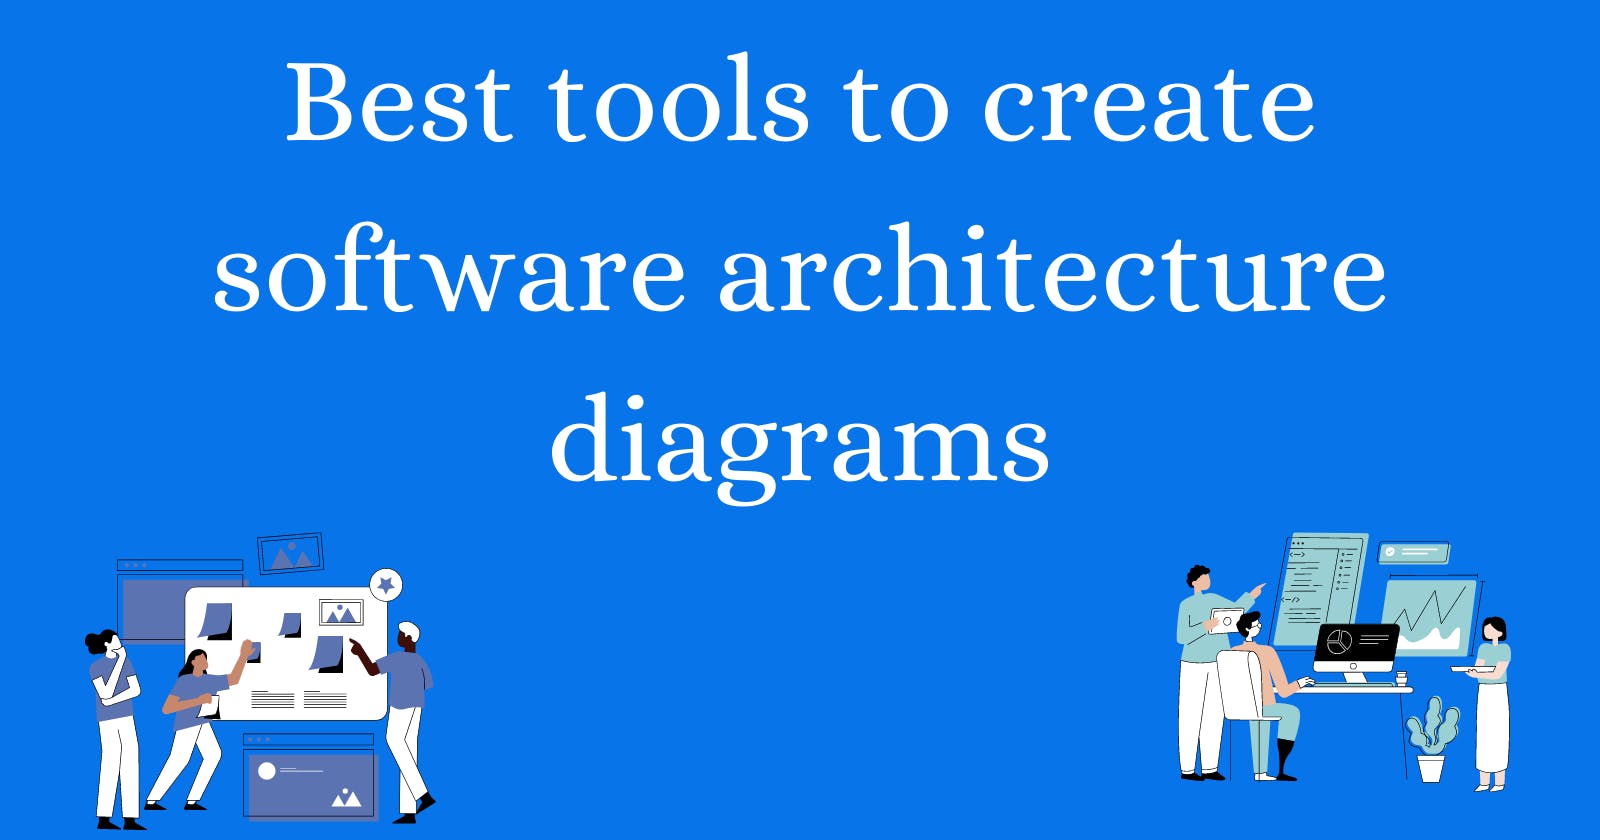 Best tools to create software architecture diagrams